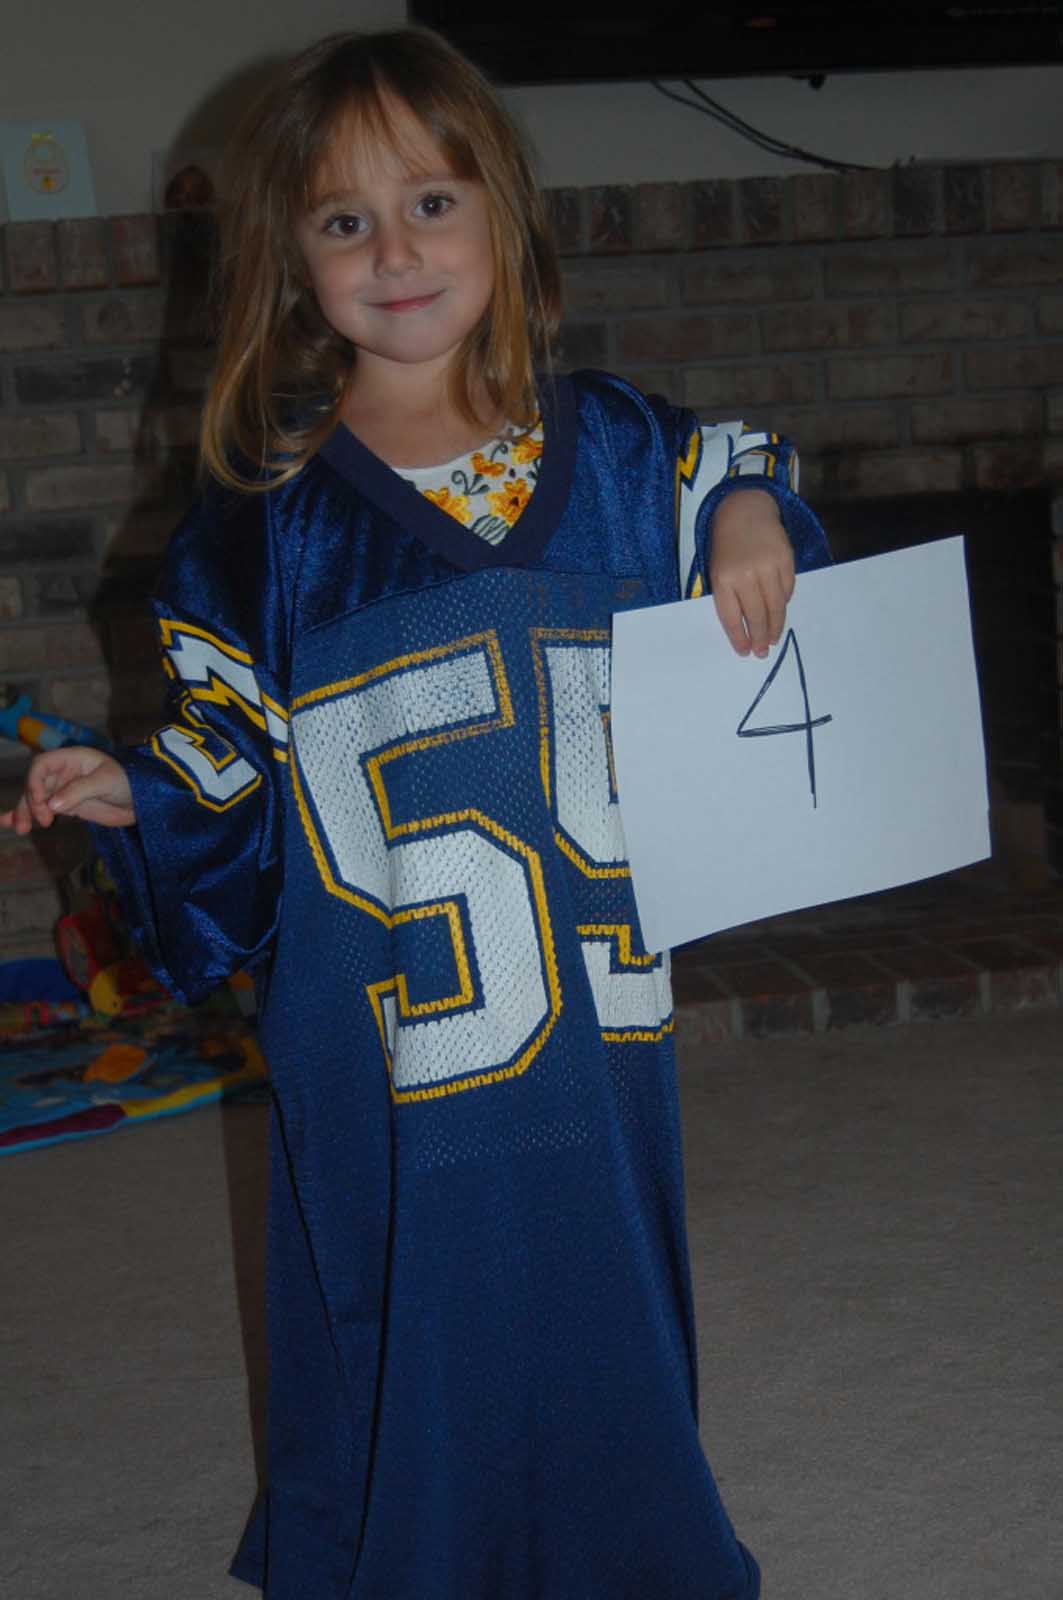 ***Birthday tradition in daddys favorite jersey. 4yr old***